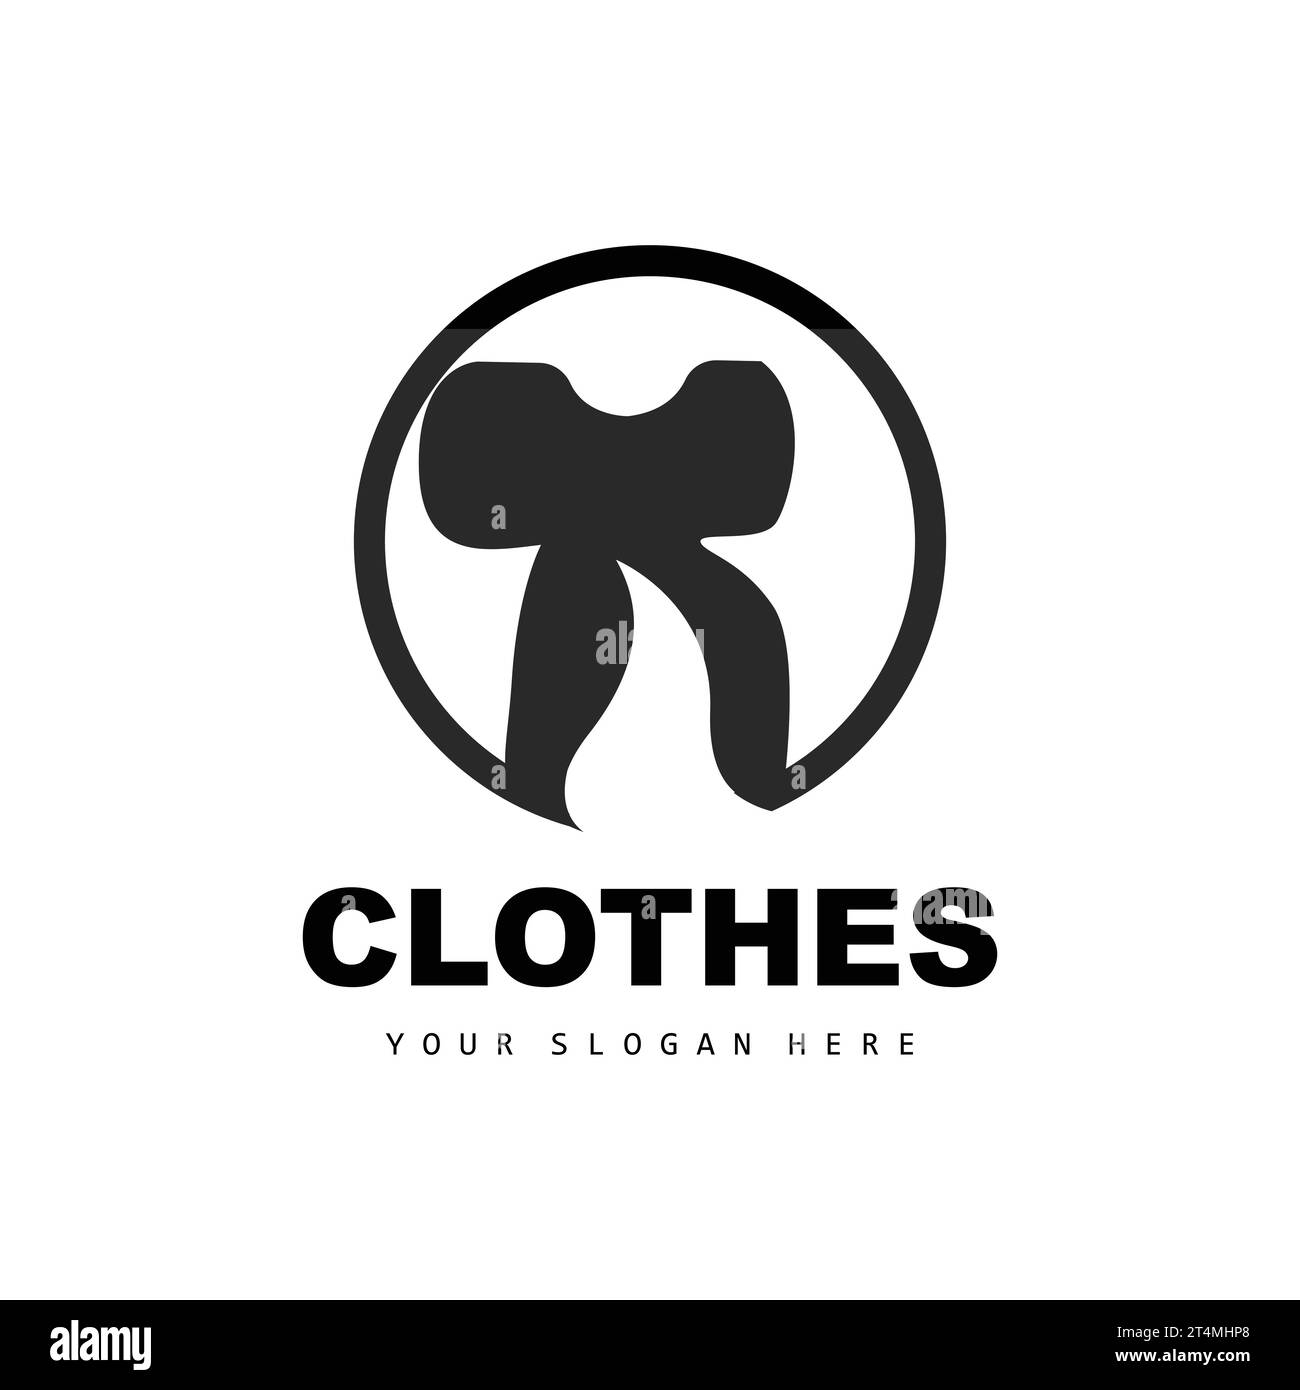 Clothing Logo, Simple Style Shirt Design, Clothing Store Vector ...